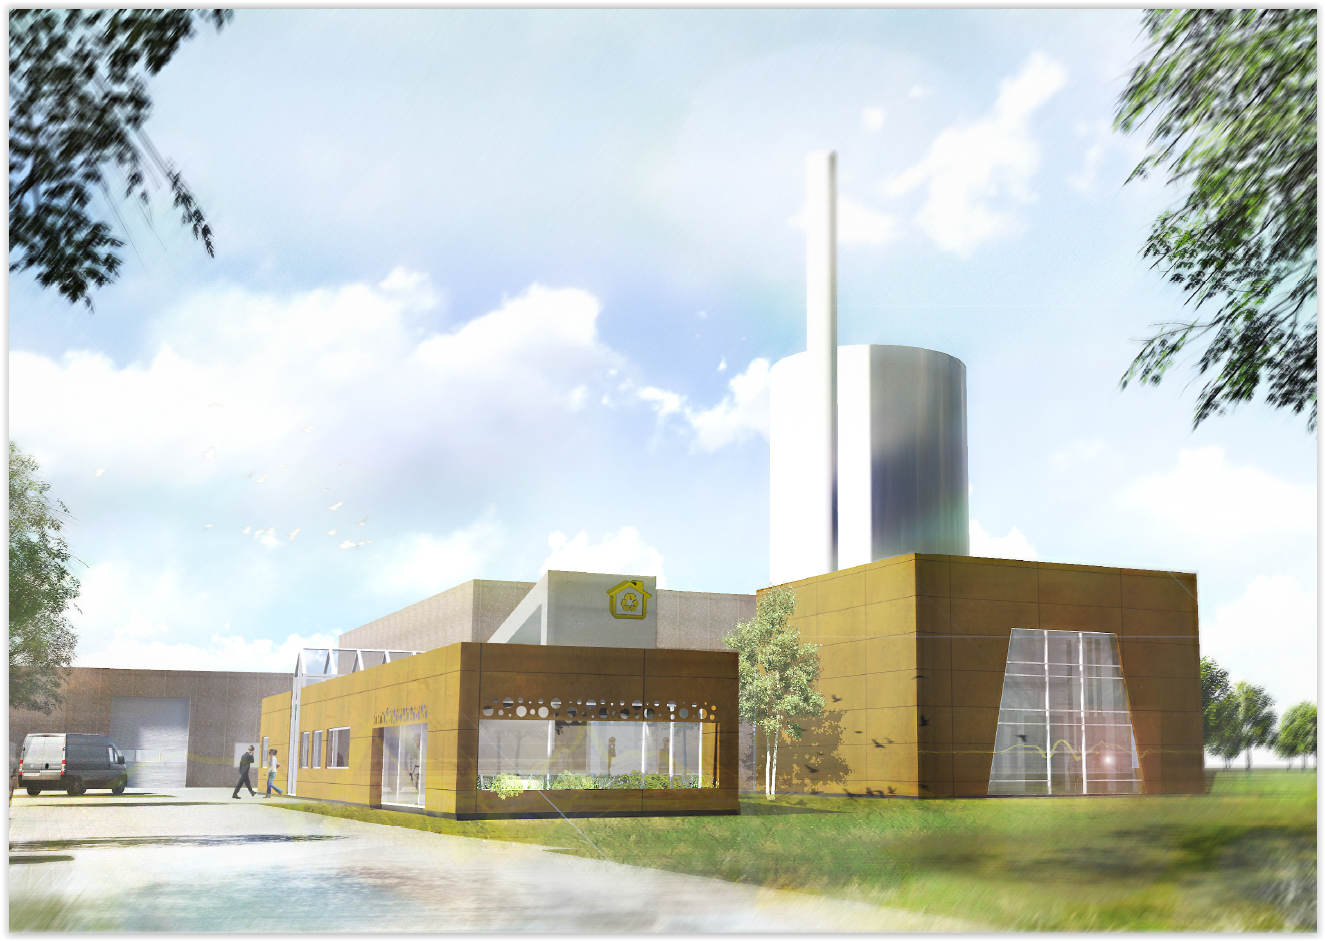 as:scan Industries will supply another PARAT High Voltage Electrode boiler for the central heating sector in Denmark, the boiler can use any leftover electricity from wind turbines, as well as engage in the balancing market to stabilize the grid frequency.